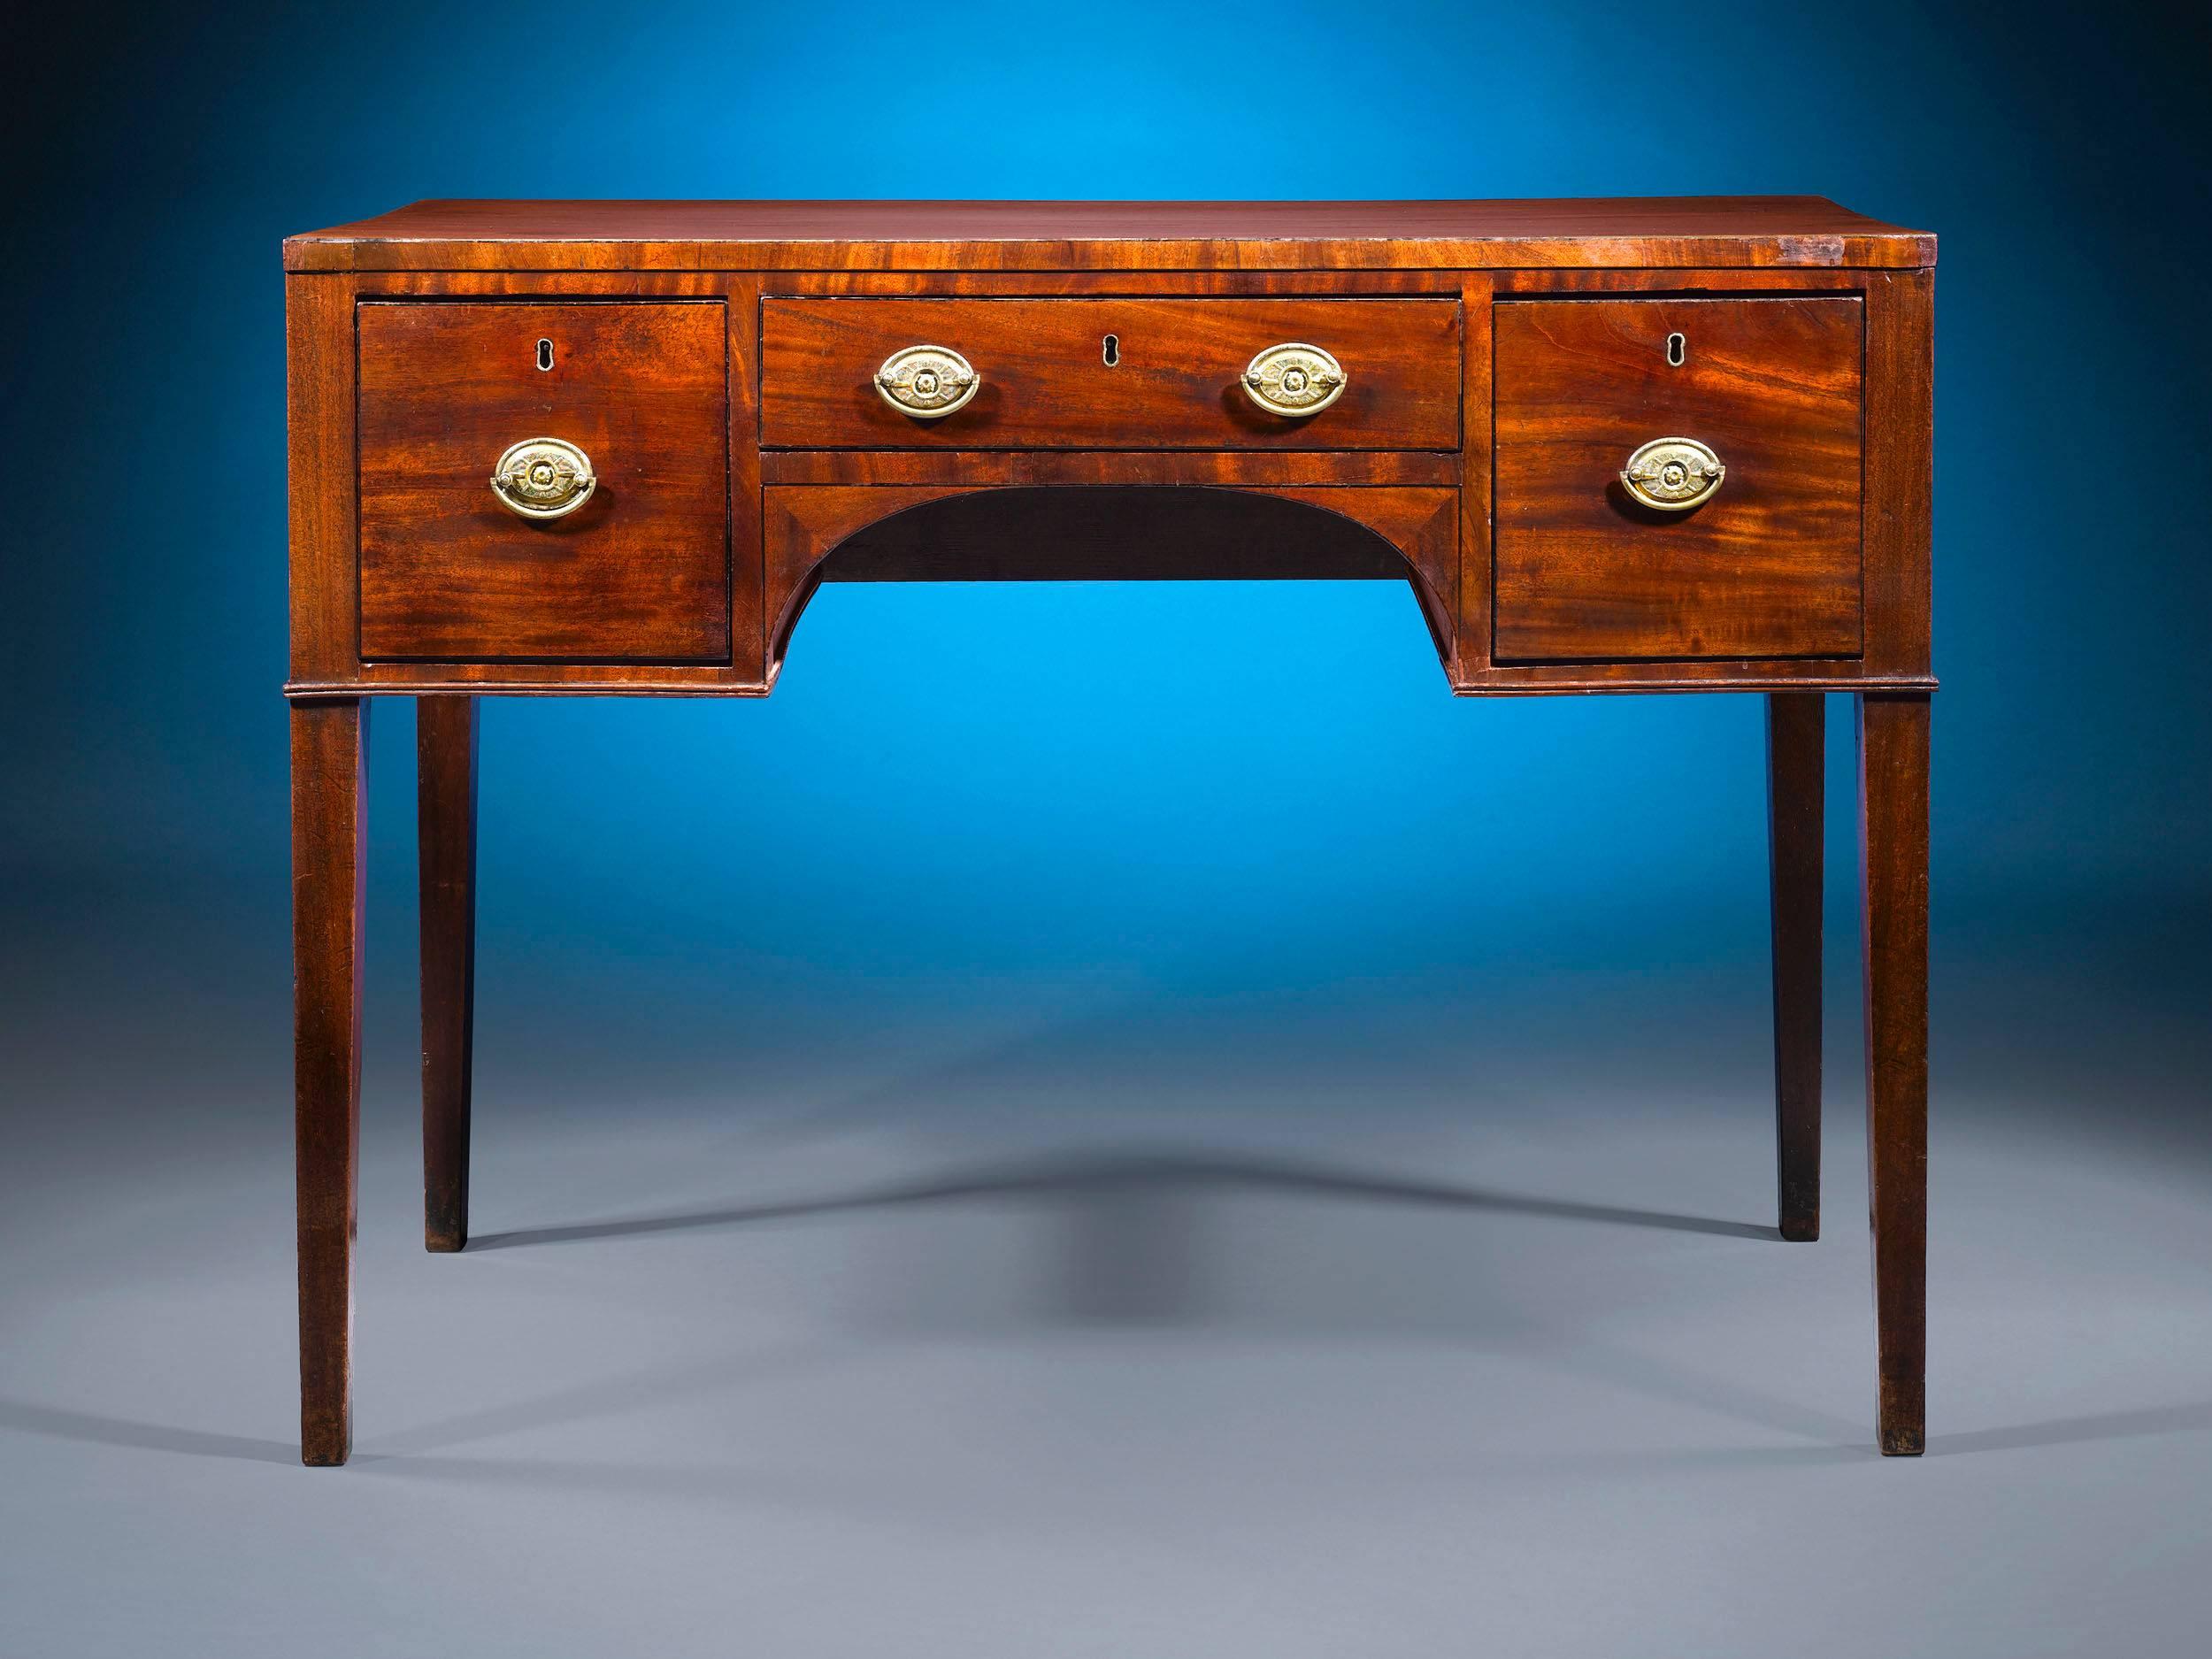 This fine Georgian-era desk is crafted of rich mahogany and features the straightforward design prevalent in England during the early 19th century. Three lockable drawers are adorned with period-style brass pulls, and the desk rests upon tapered